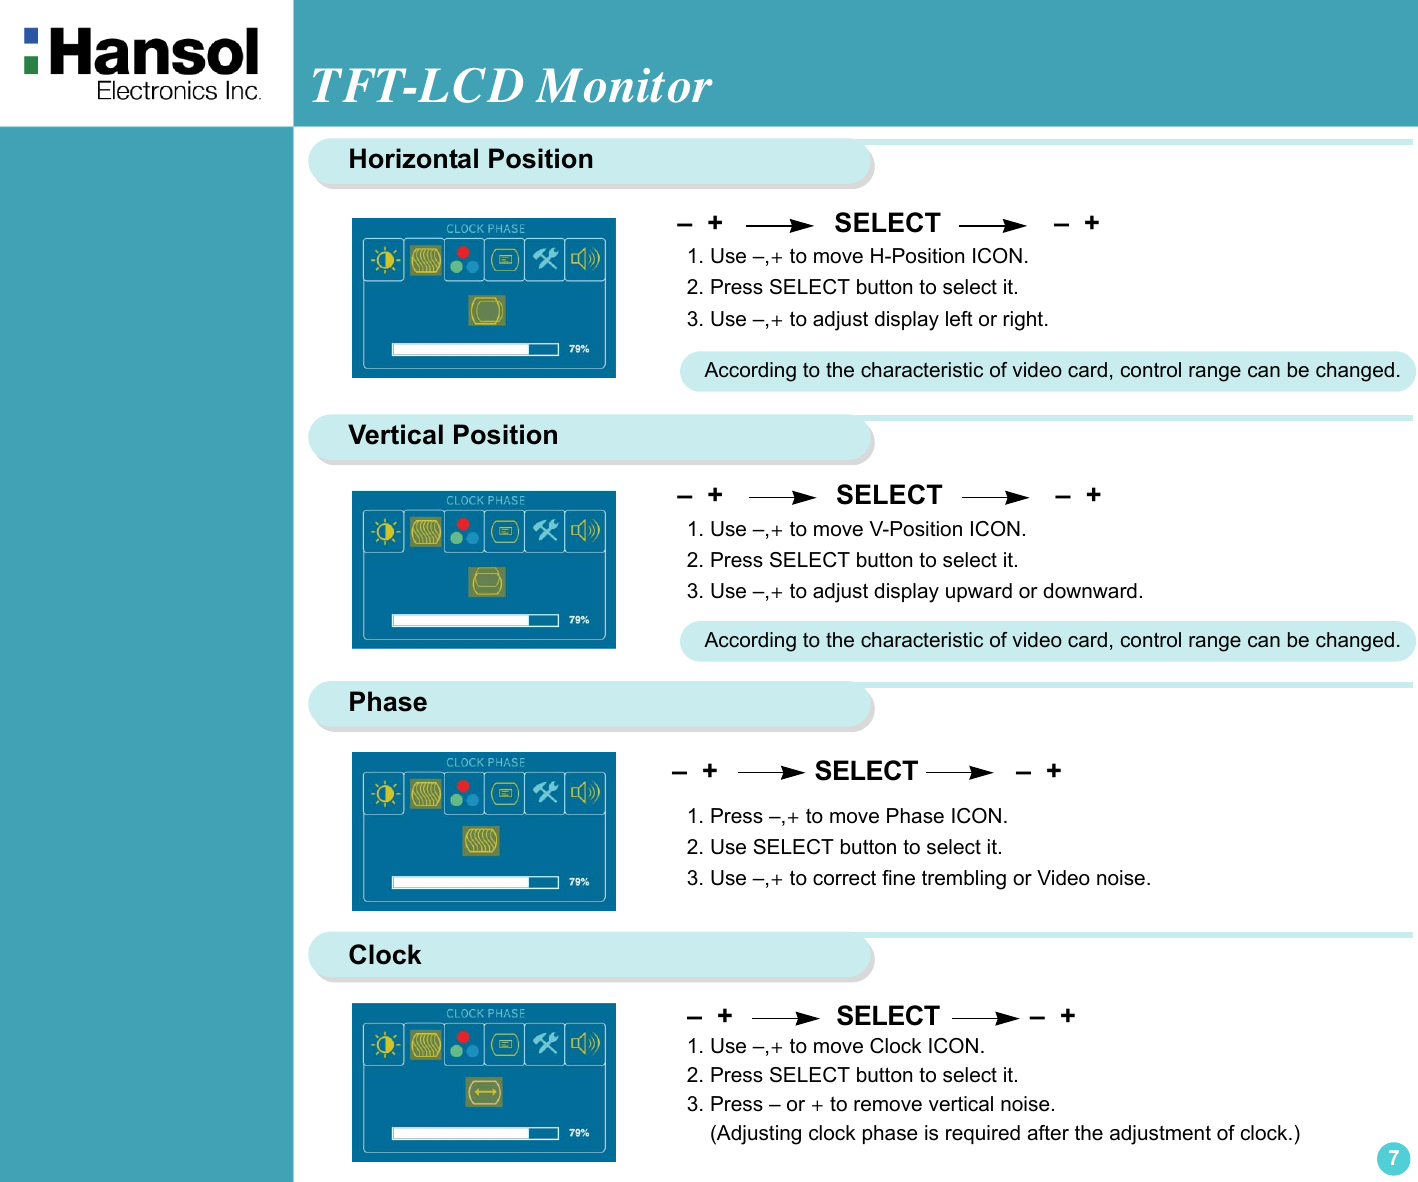 TFT-LCD Monitor7Horizontal PositionVertical Position –  +                  SELECT               –  + 1. Use –,+ to move H-Position ICON.2. Press SELECT button to select it.3. Use –,+ to adjust display left or right.According to the characteristic of video card, control range can be changed.Phase –  +                  SELECT               –  +  1. Use –,+ to move V-Position ICON.2. Press SELECT button to select it.3. Use –,+ to adjust display upward or downward. –  +             SELECT             –  + 1. Press –,+ to move Phase ICON.2. Use SELECT button to select it.3. Use –,+ to correct fine trembling or Video noise.According to the characteristic of video card, control range can be changed.Clock   –  +              SELECT            –  +  1. Use –,+ to move Clock ICON.2. Press SELECT button to select it.3. Press – or + to remove vertical noise.    (Adjusting clock phase is required after the adjustment of clock.)